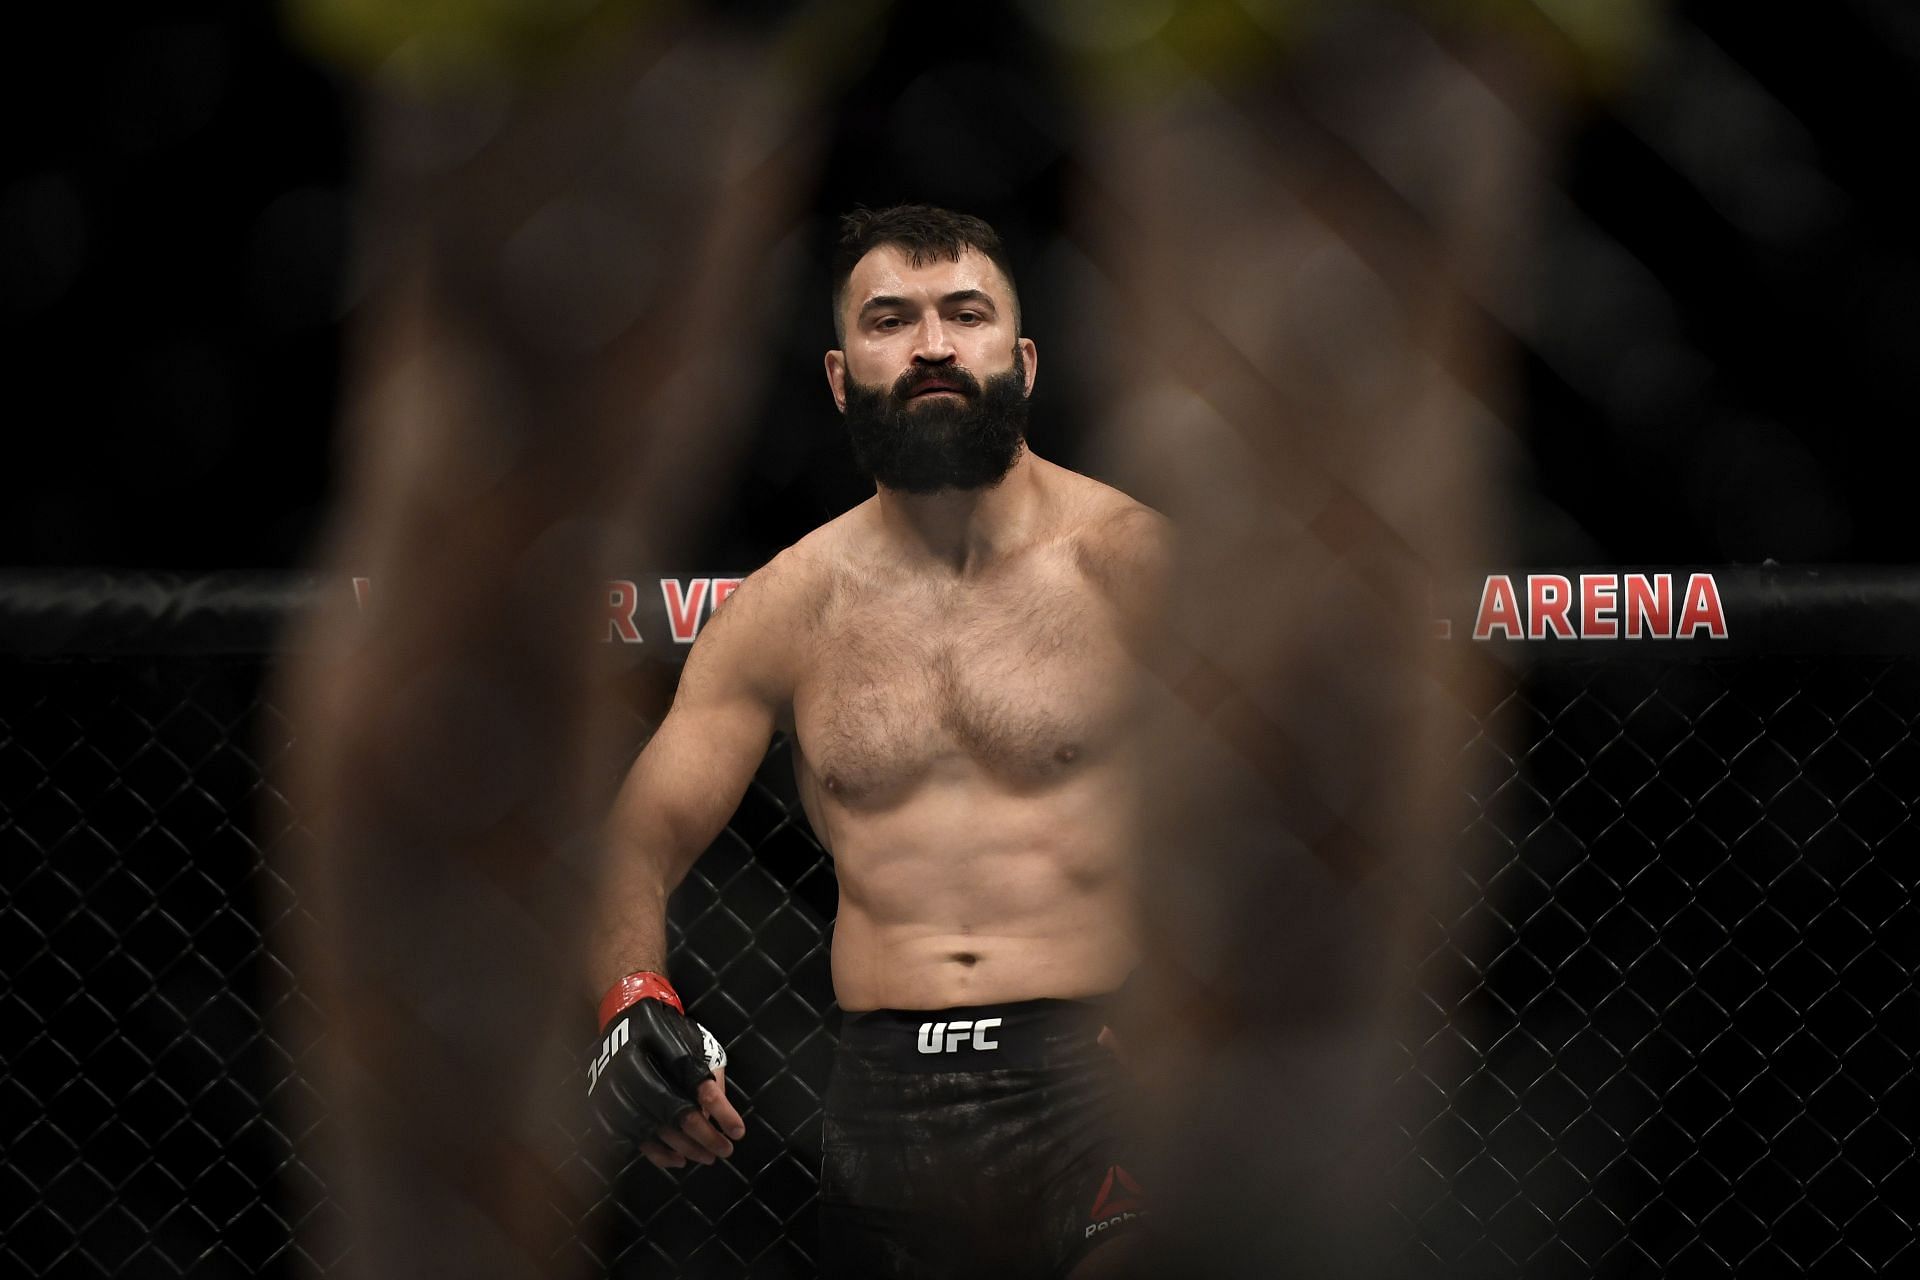 Andrei Arlovski holds a record of 33-20 (2 NC)